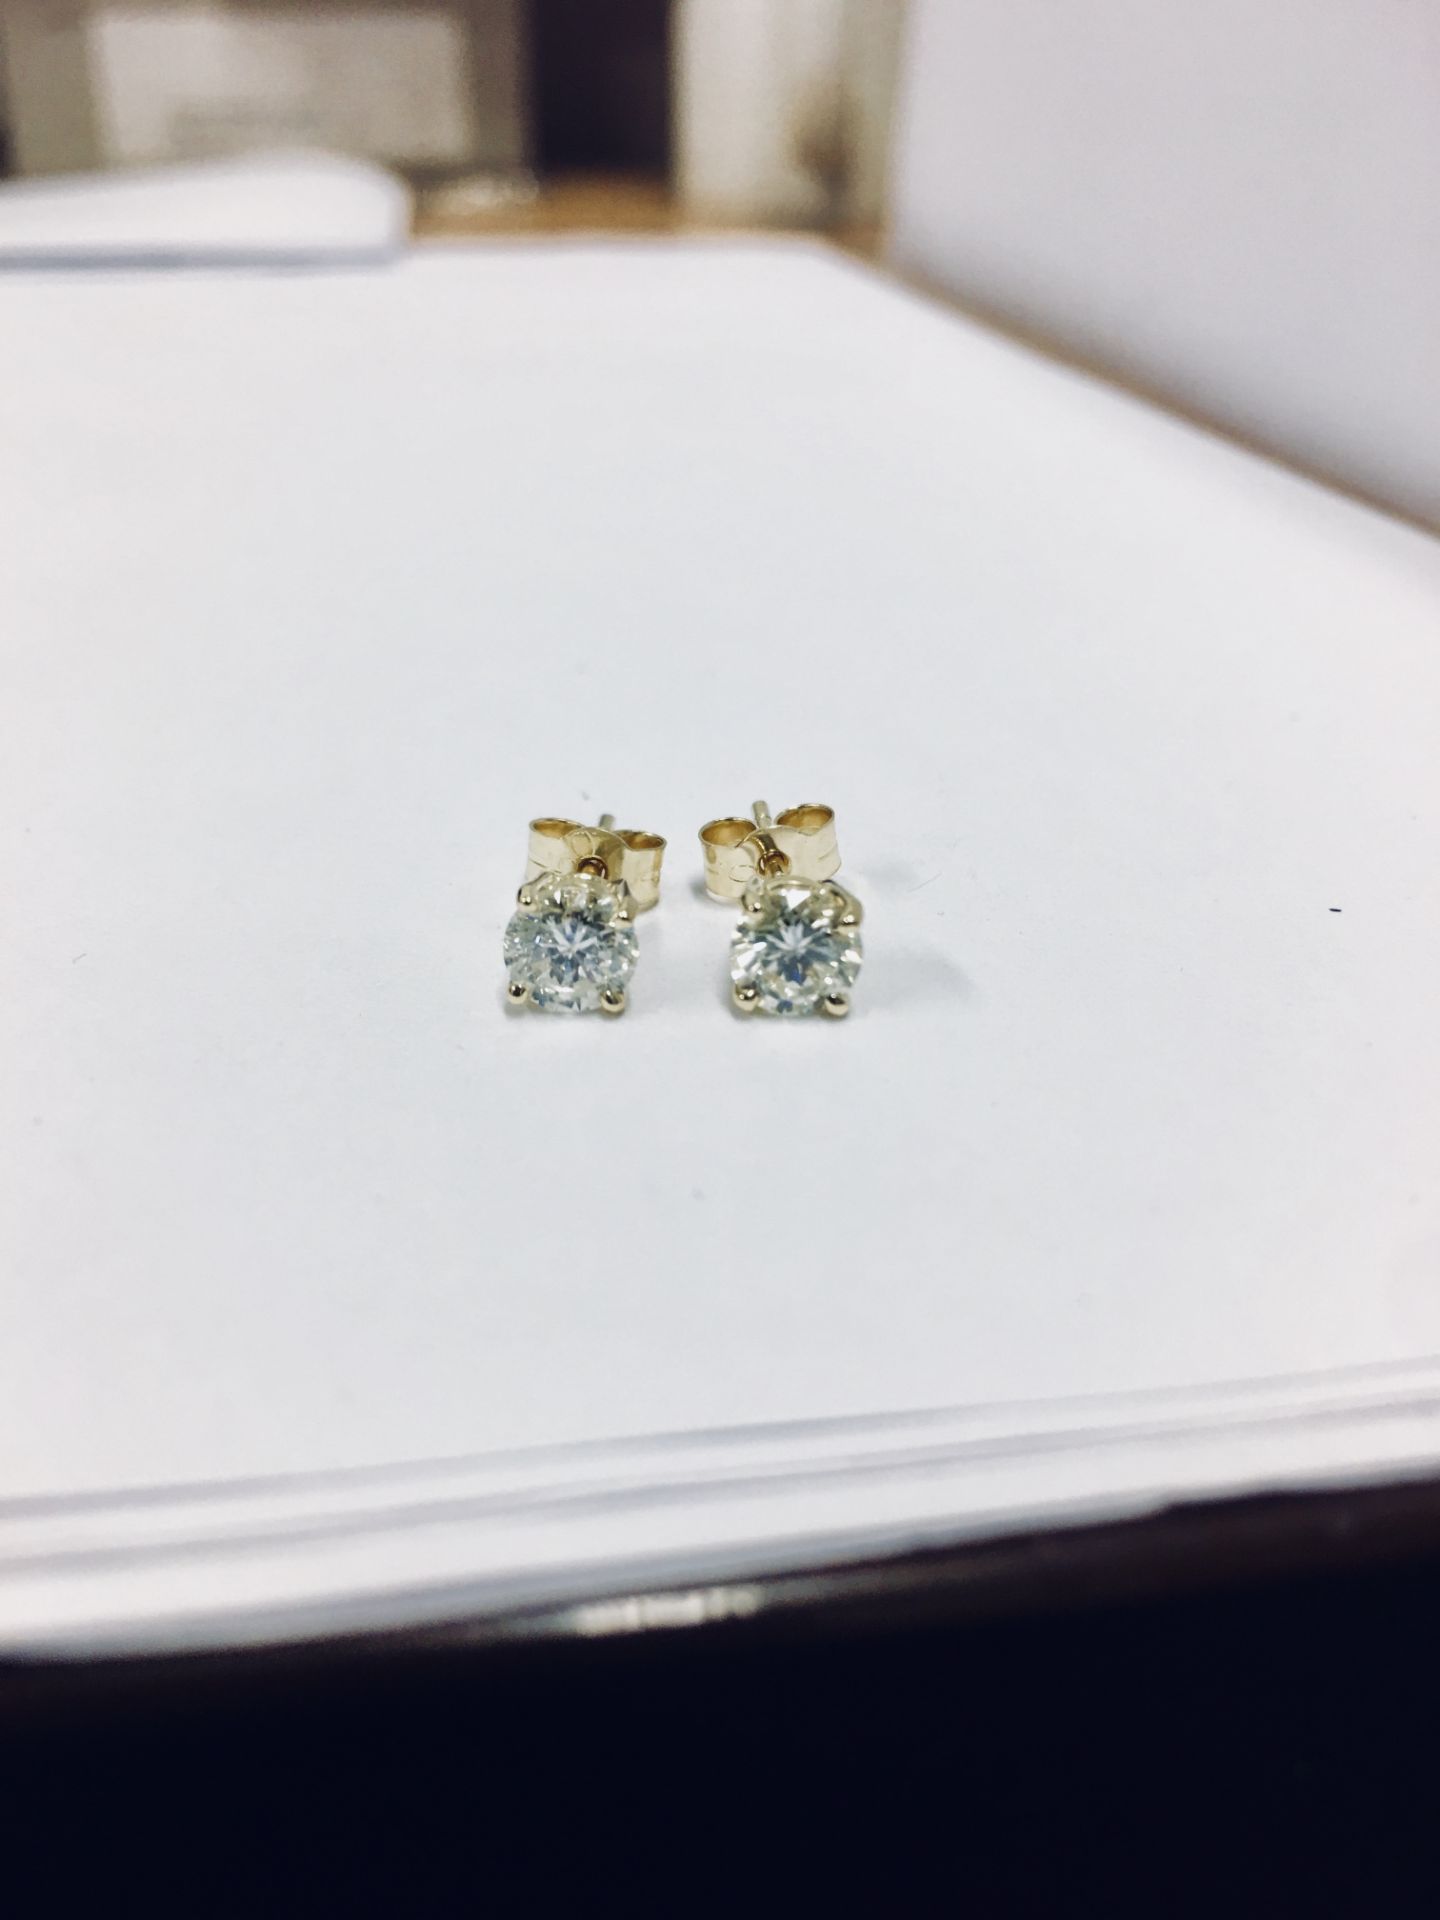 1.00Ct Diamond Solitaire Earrings Set In 18Ct Yellow Gold. - Image 17 of 19